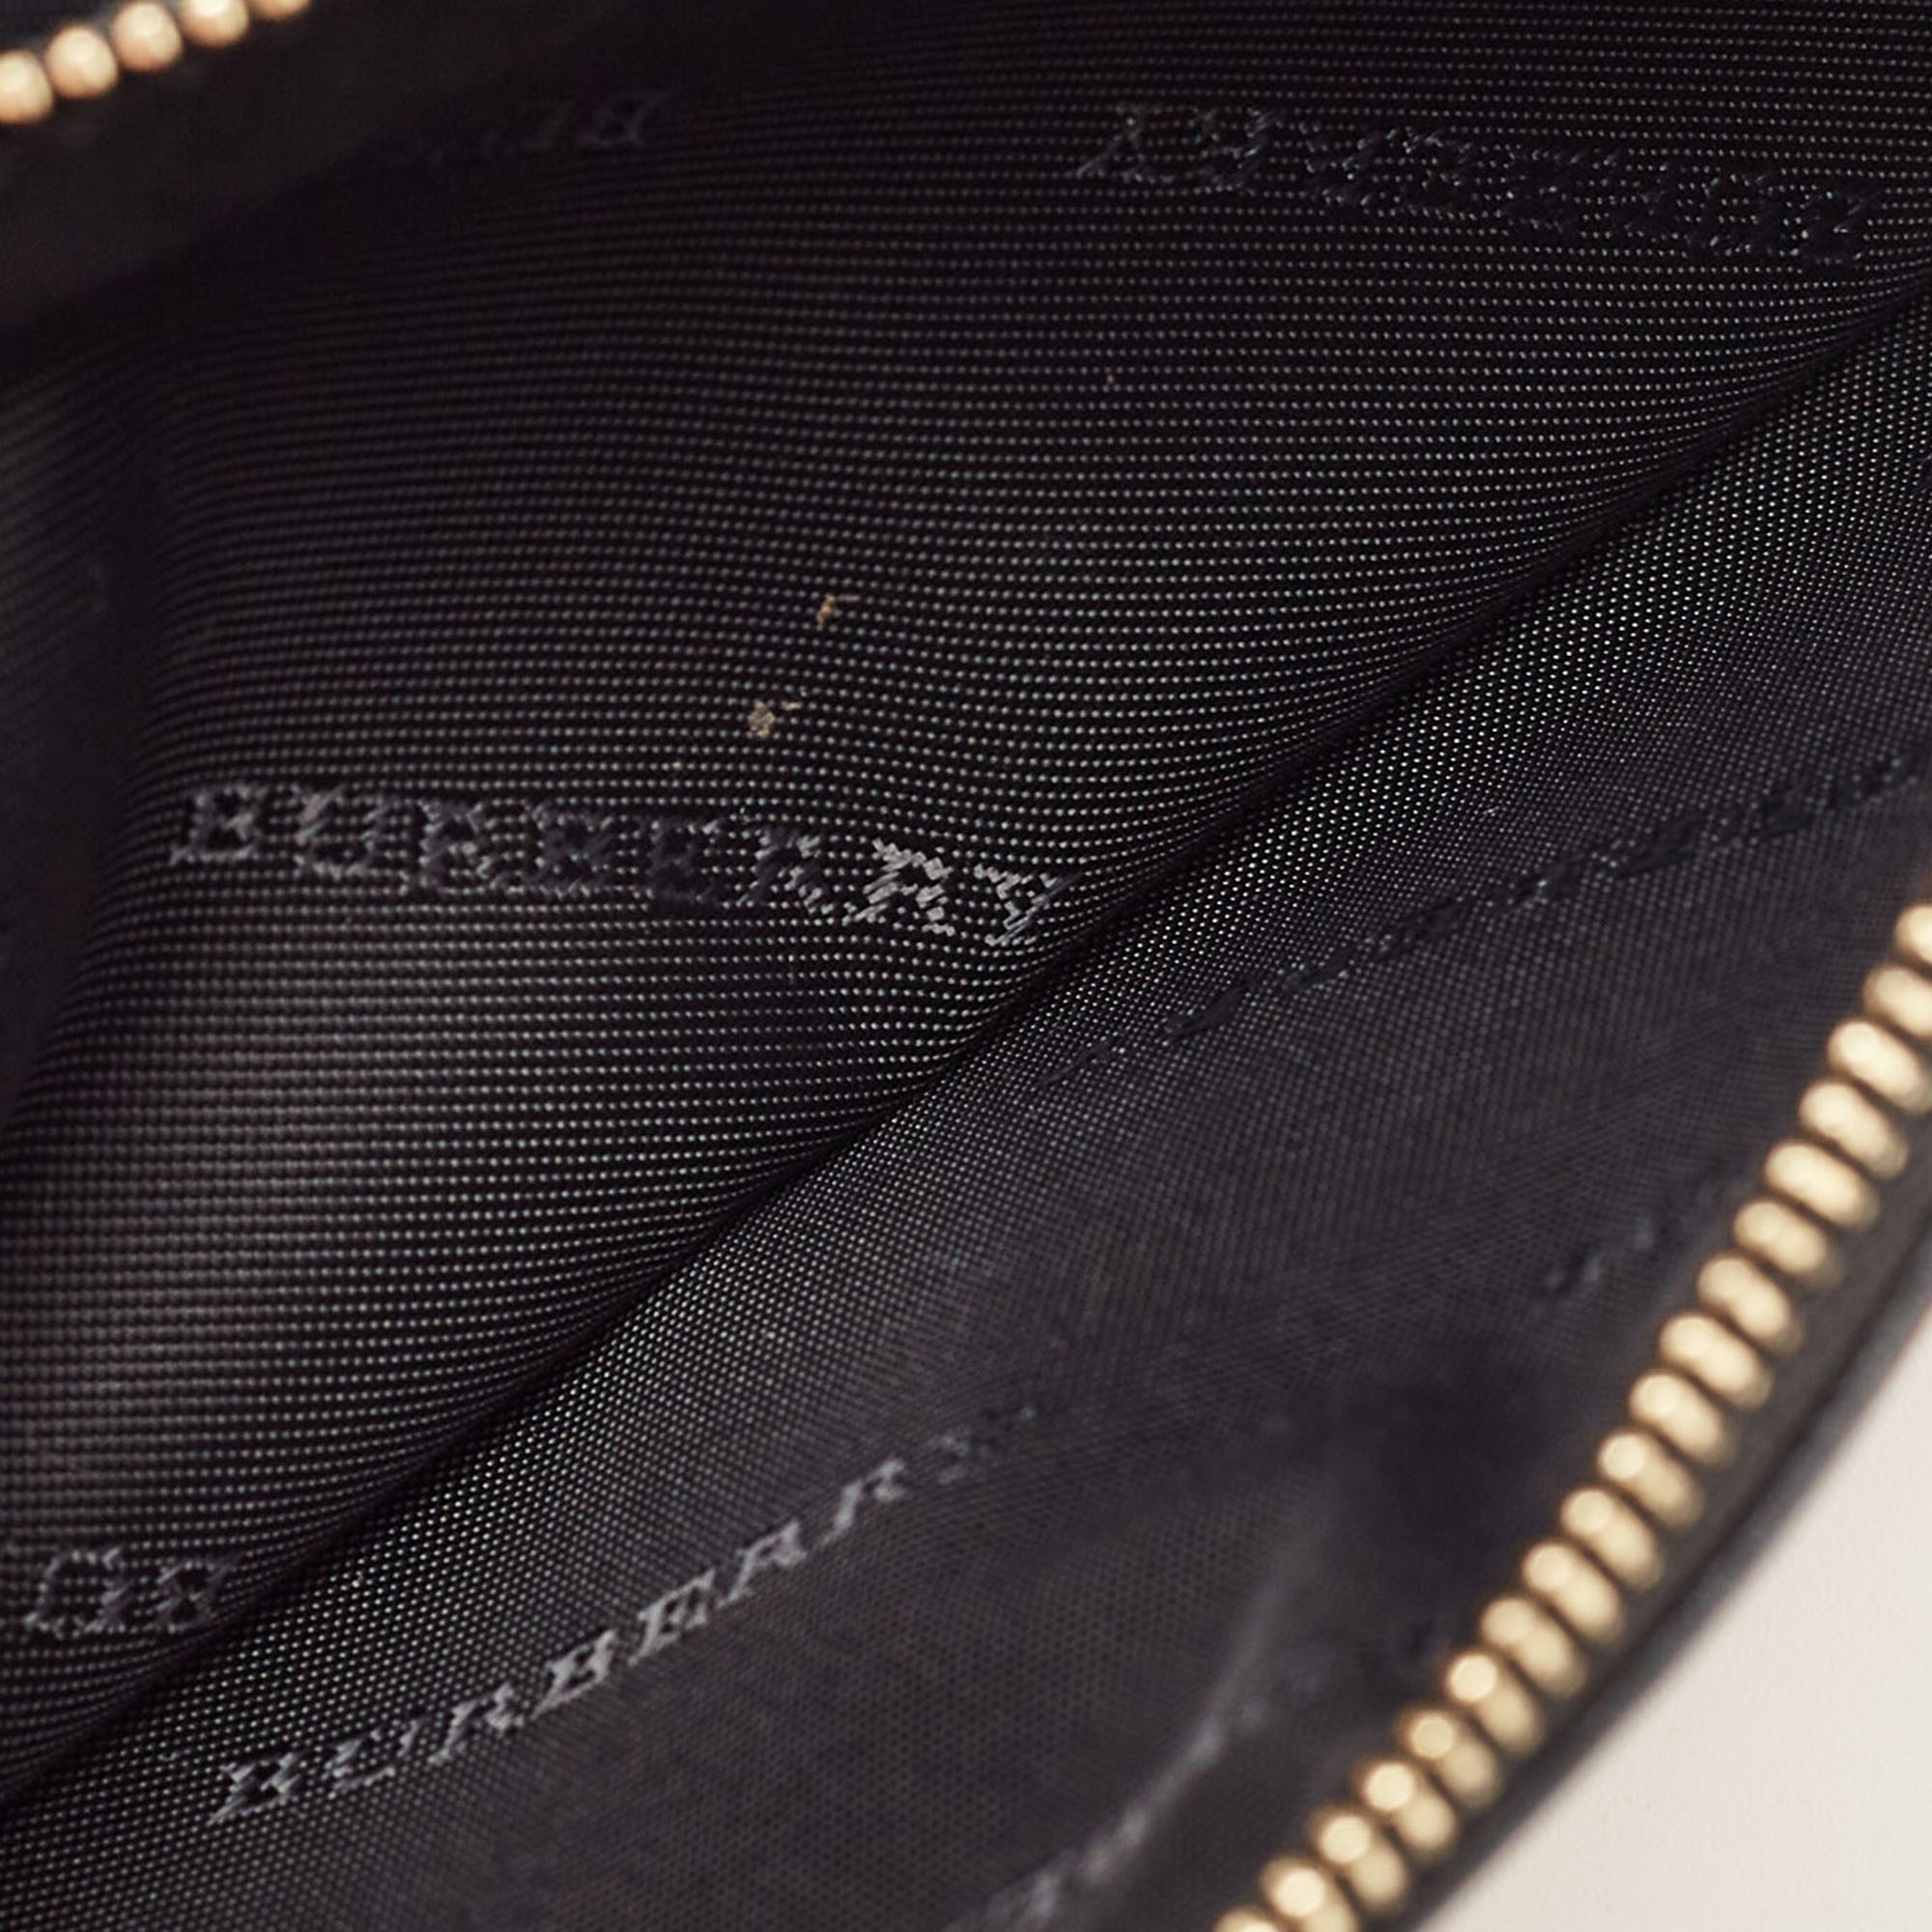 Burberry Black/Beige House Check Canvas And Leather Flap Continental Wallet